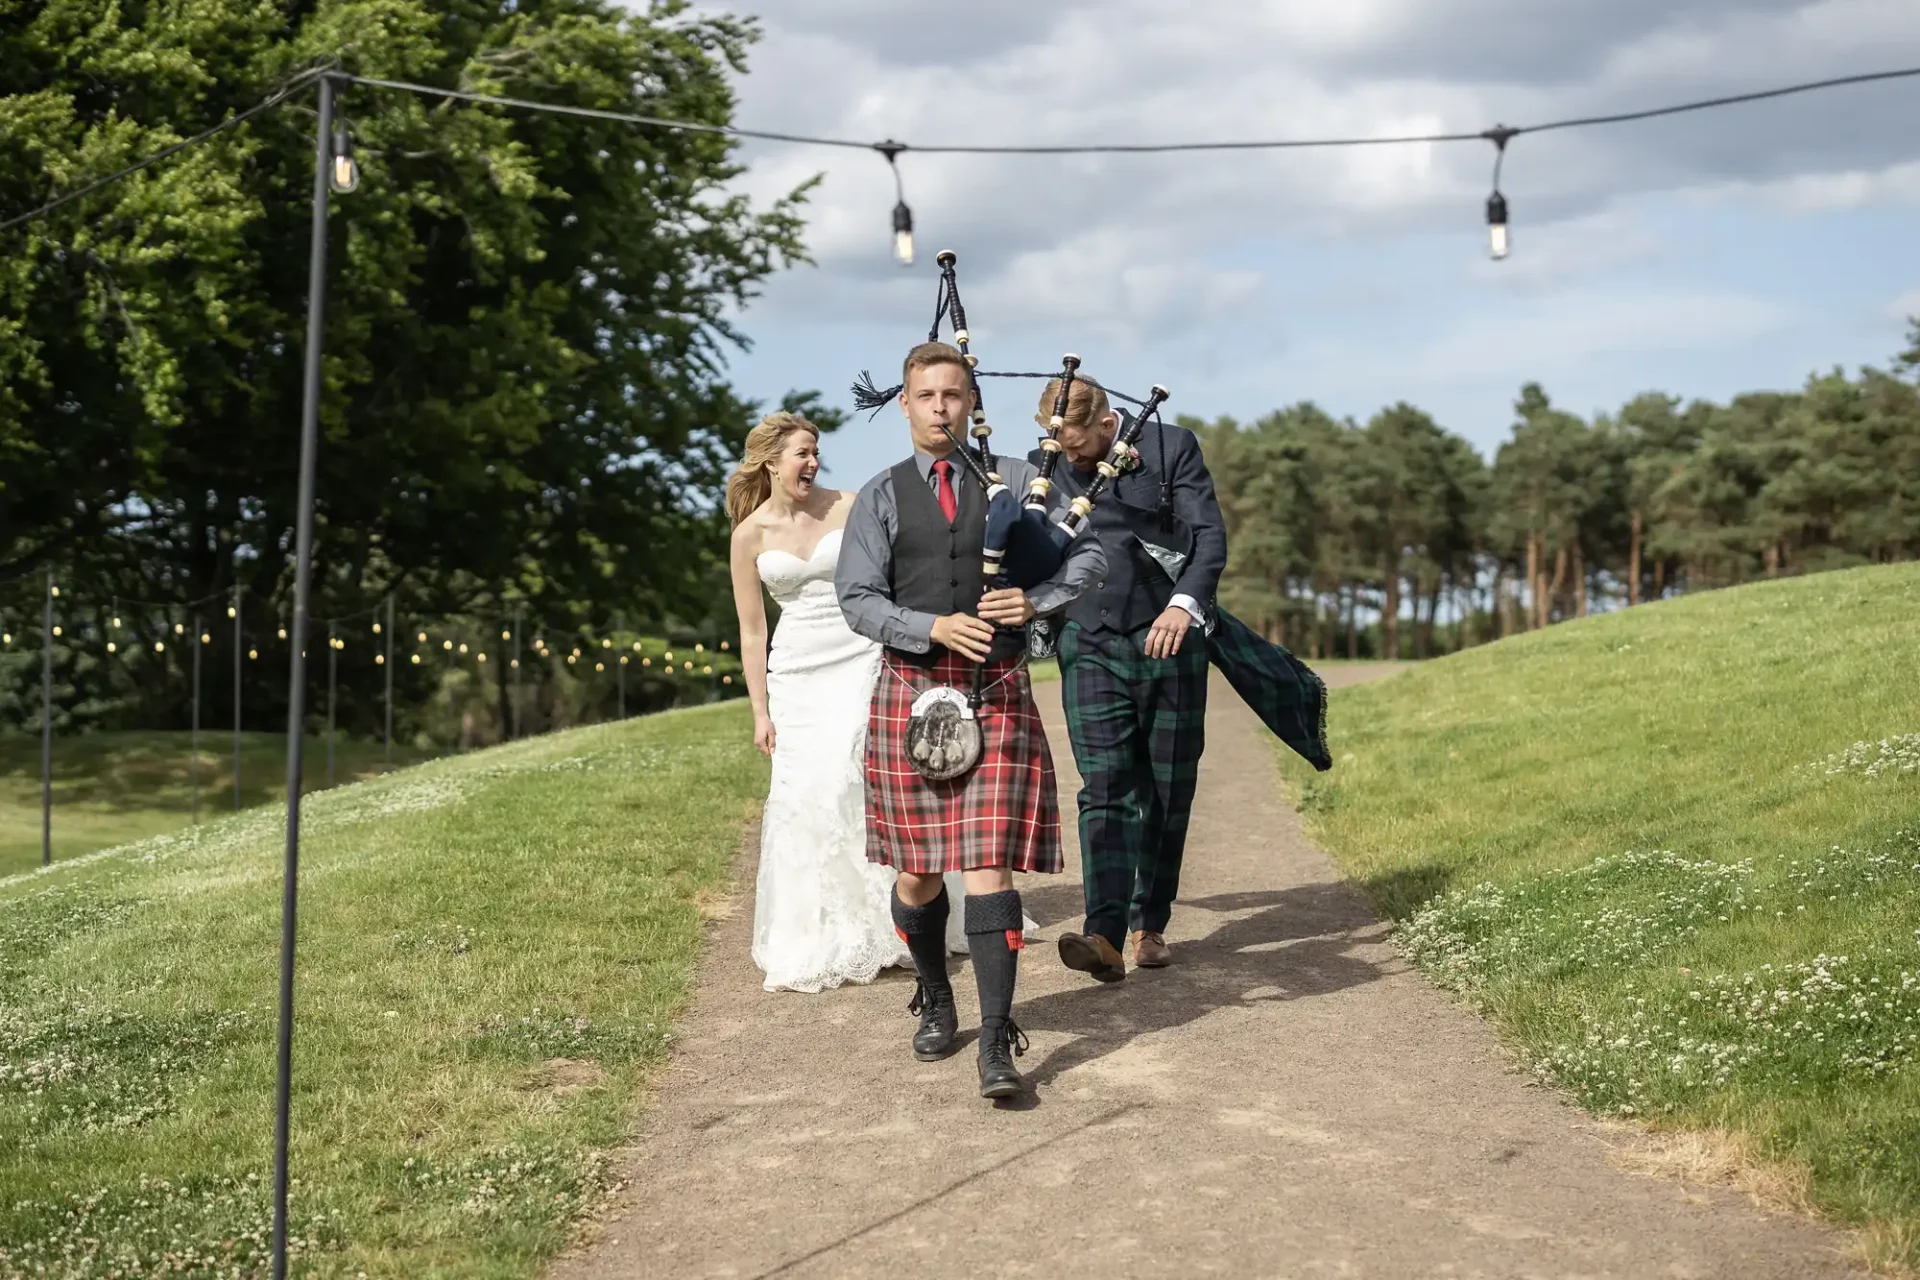 A bride and groom walk along a pathway with a bagpiper in traditional scottish attire, outdoor setting with greenery and string lights overhead.